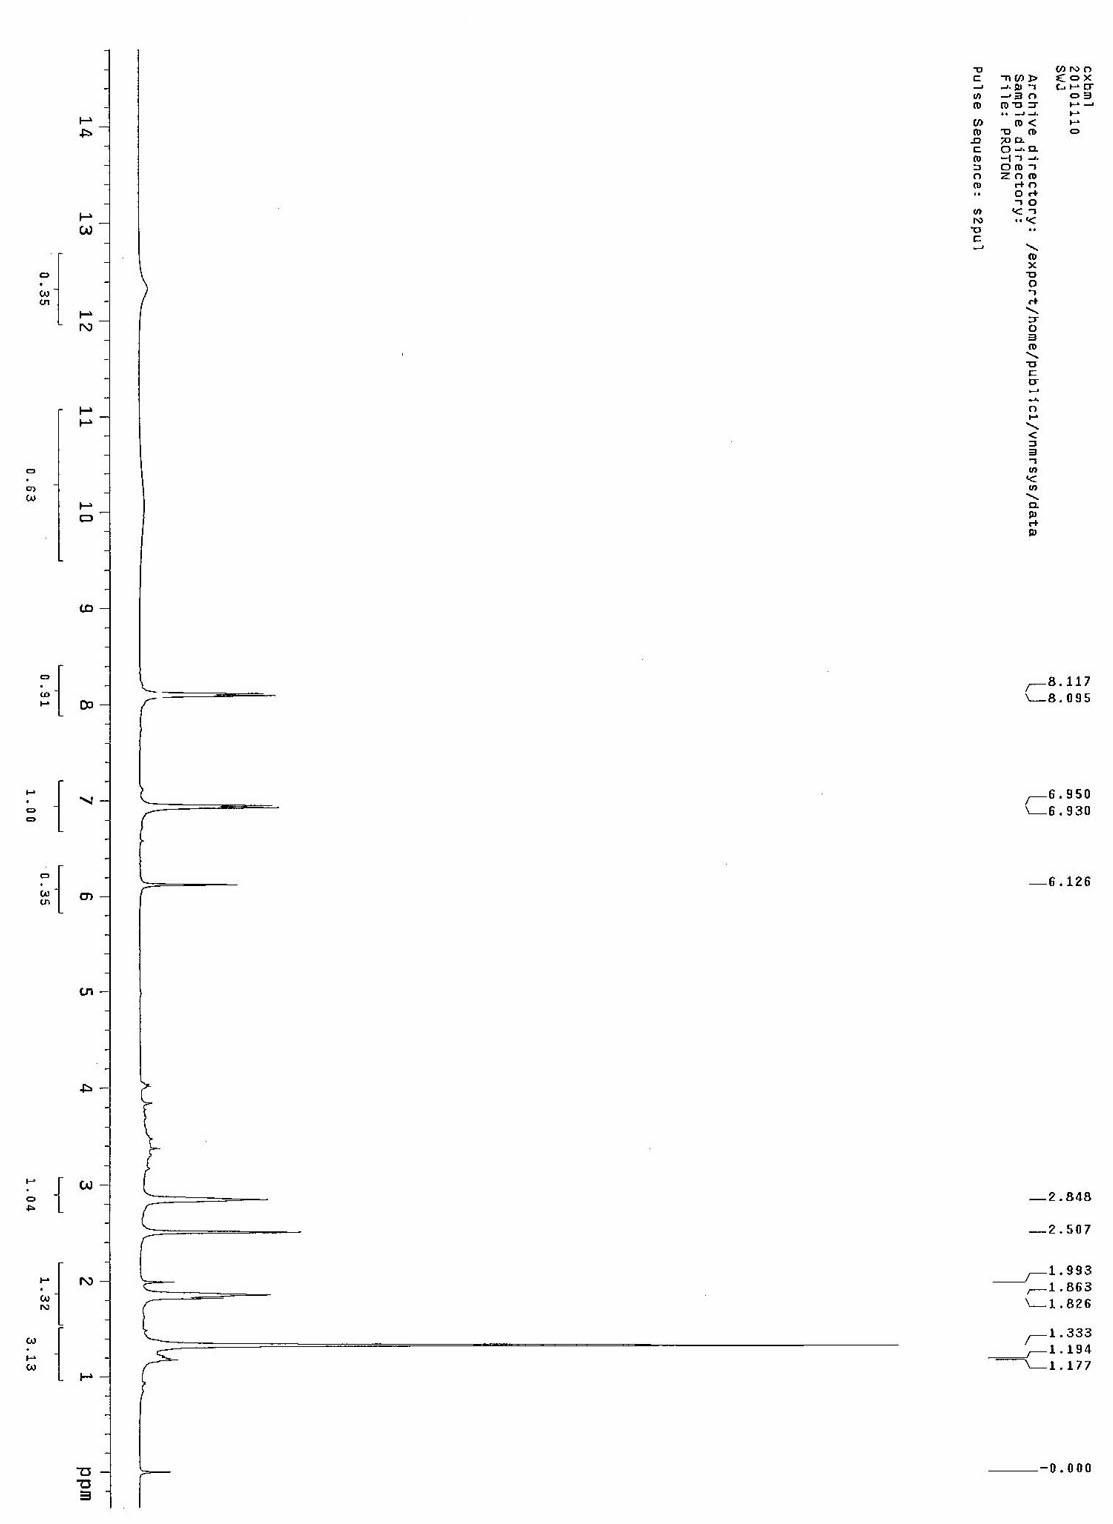 Cyclic icaritin aglycon as well as preparation method and application of cyclic icaritin aglycon